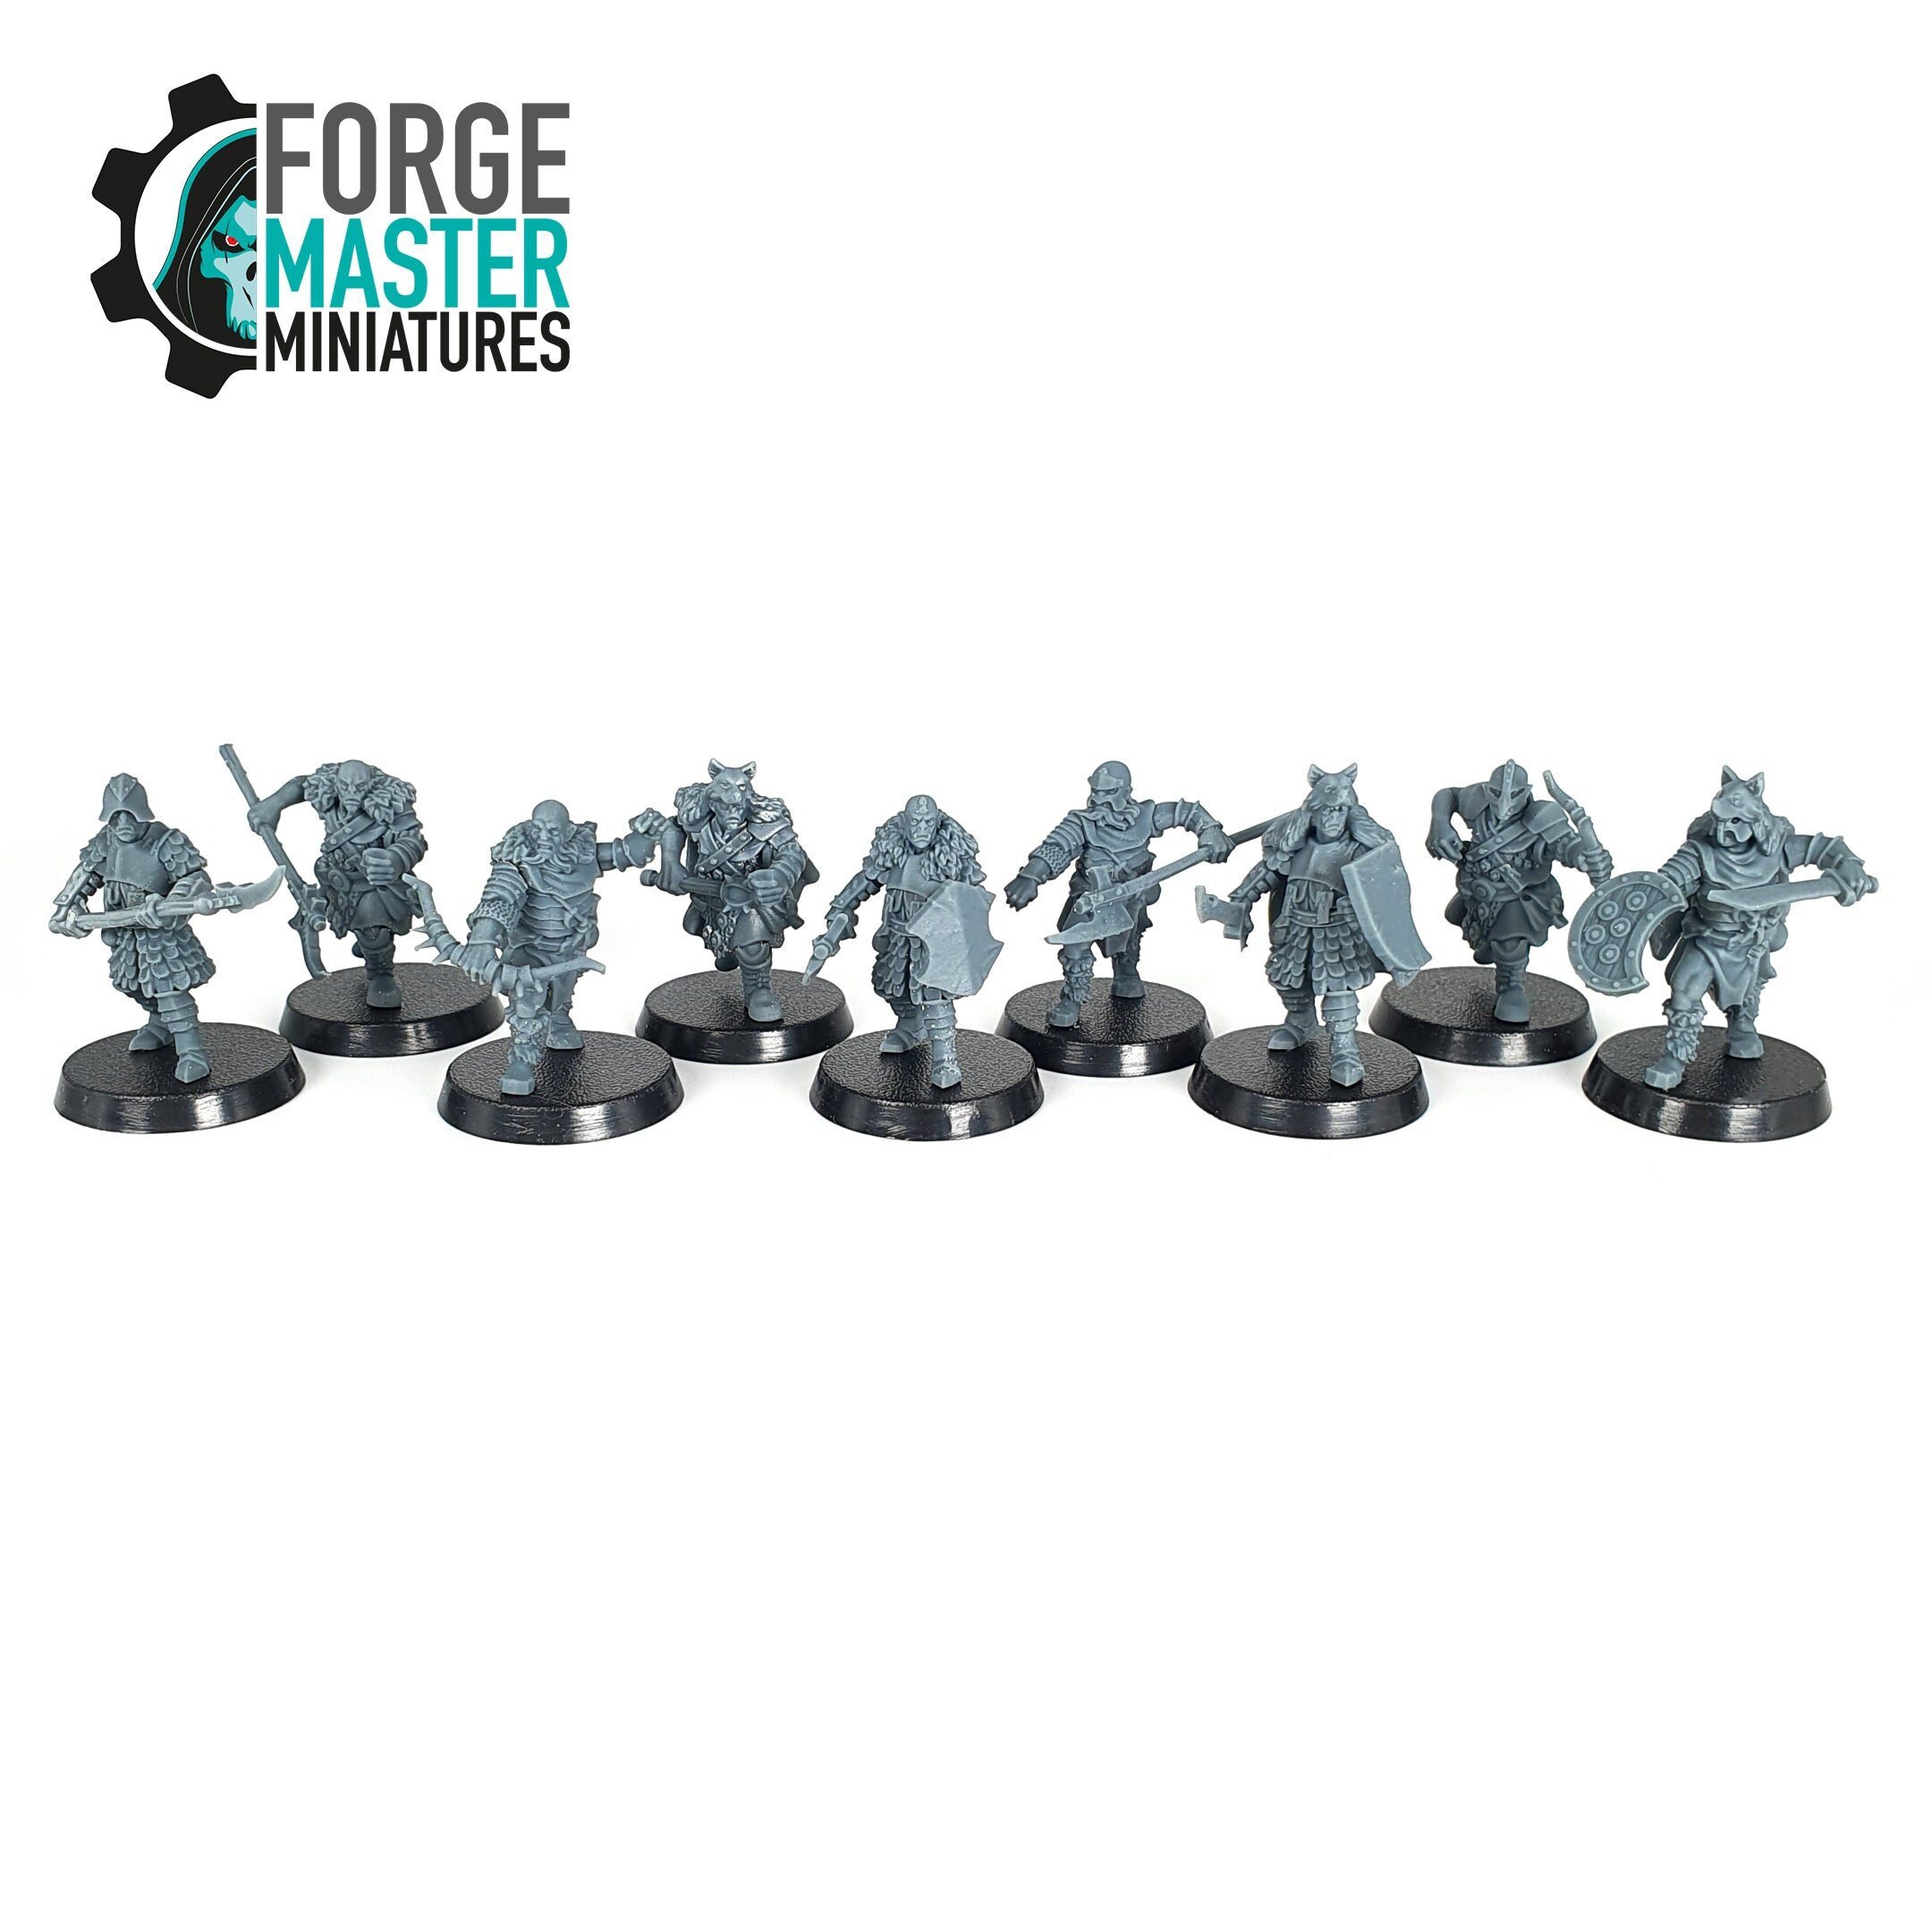 Minions of Darkness Warriors Orcs by Unreleased Miniatures 3D Printed by Forgemaster Miniatures